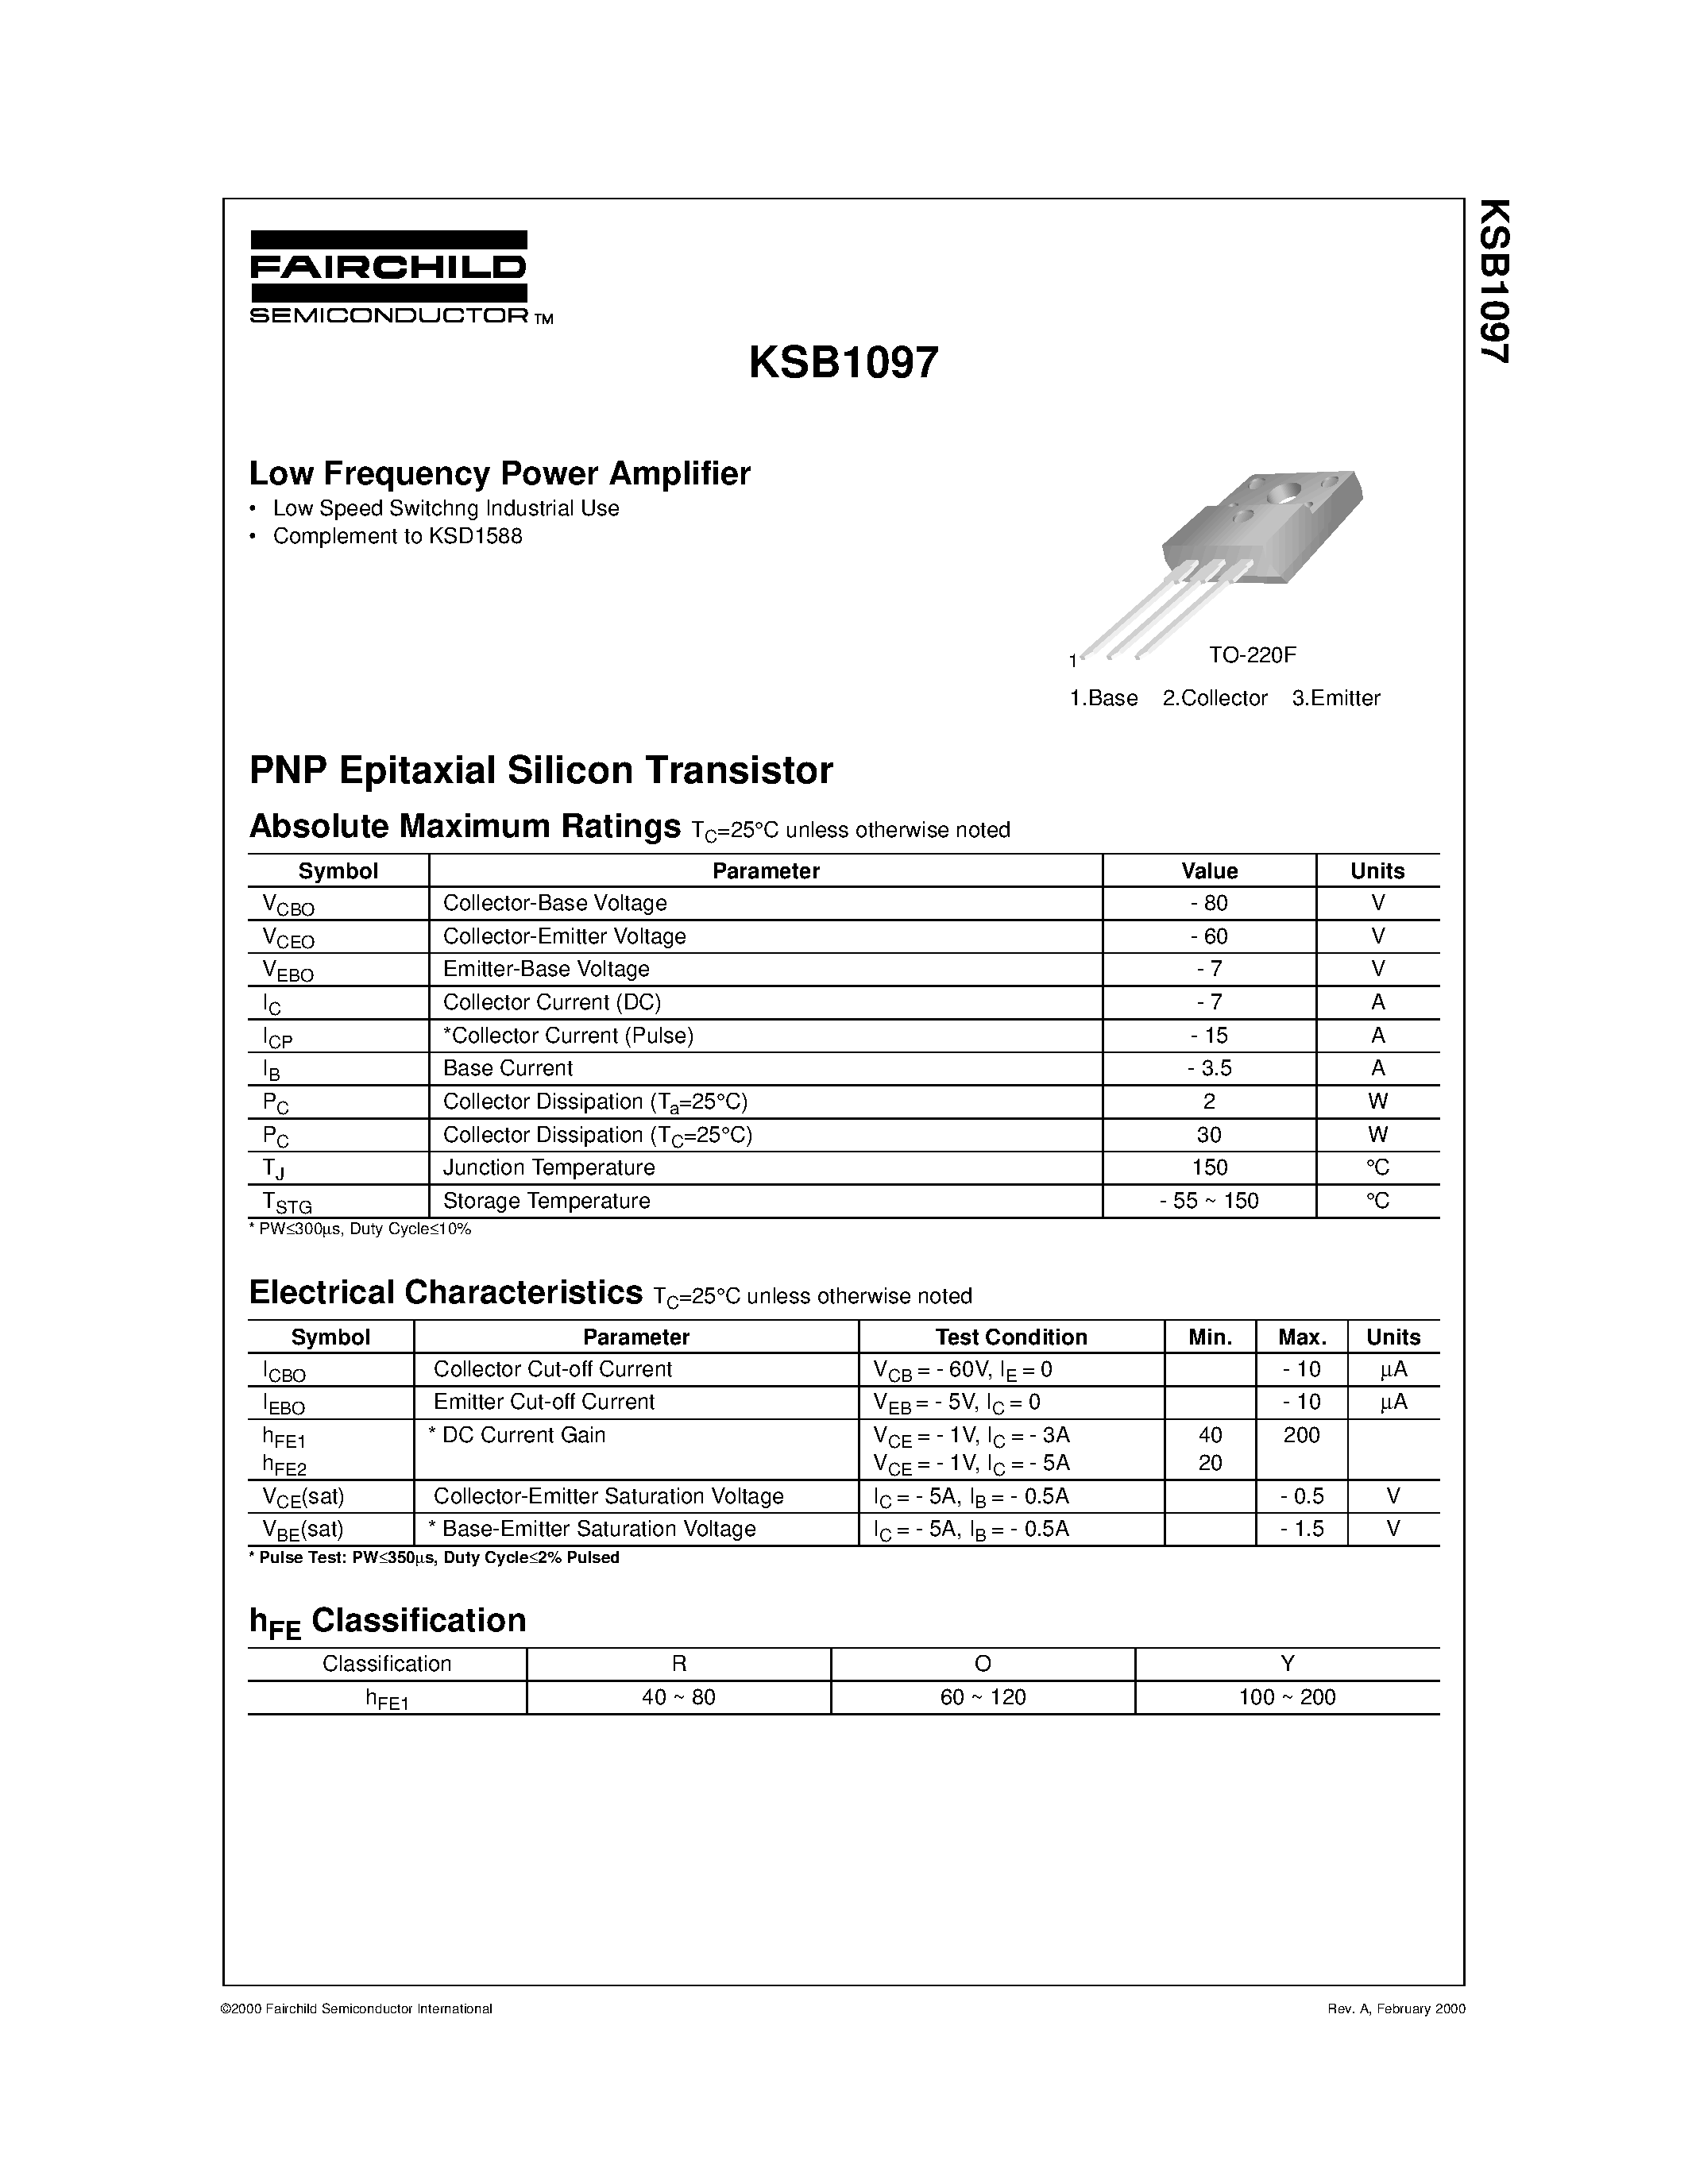 Datasheet KSB1097 - Low Frequency Power Amplifier page 1